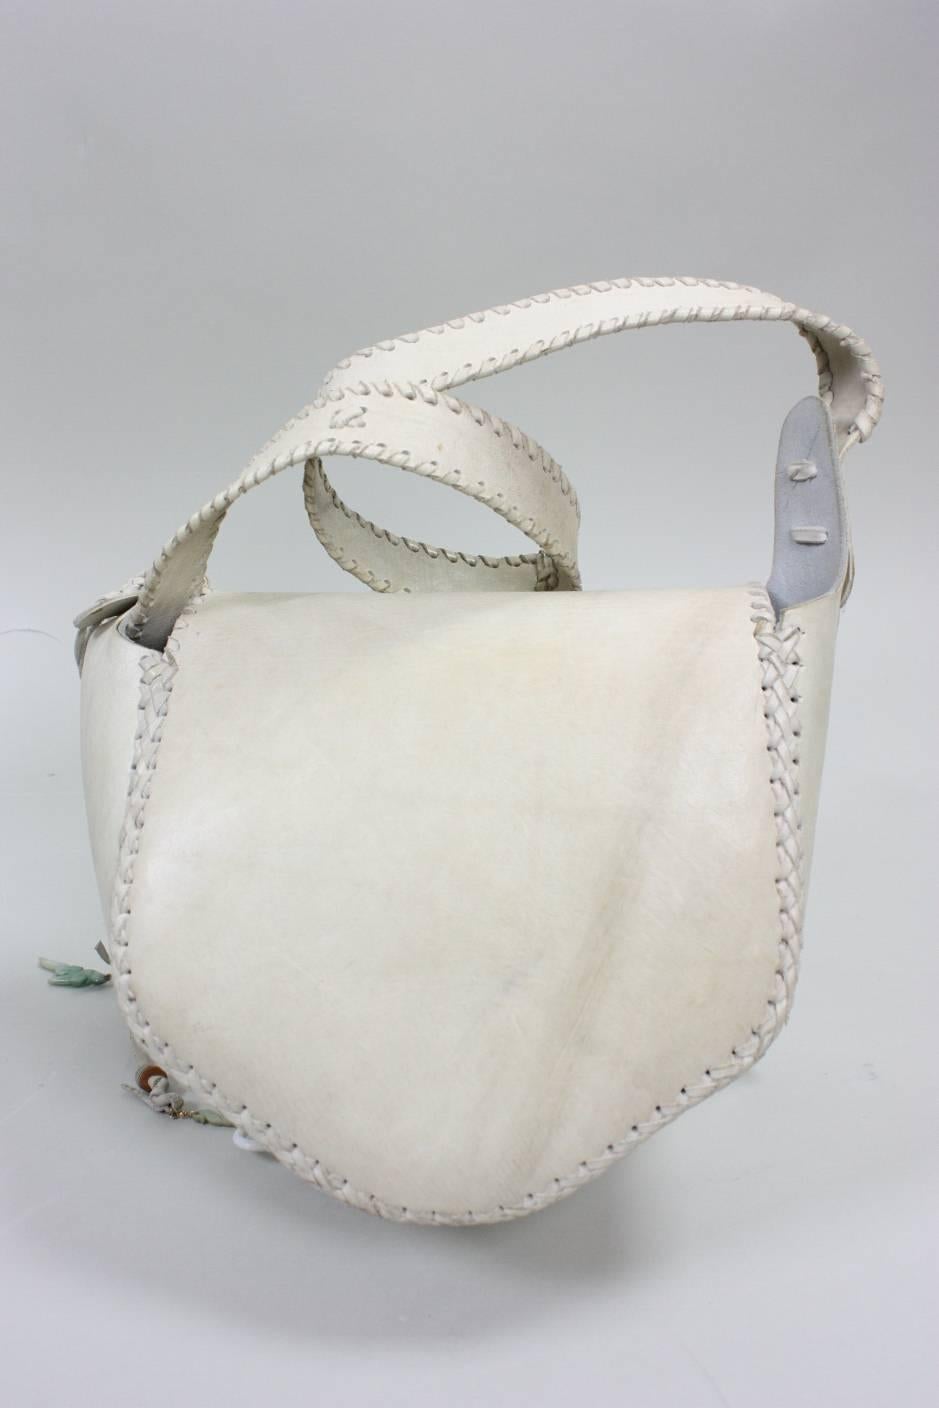 Vintage handbag from Char dates to the 1970's.  It is made of cream-colored leather that features a painted floral motif.  Whipstitched seams and edges.  Flap closure.  Interior side pocket.  Unlined.

Measurements-

Width: 9"
Height: 8